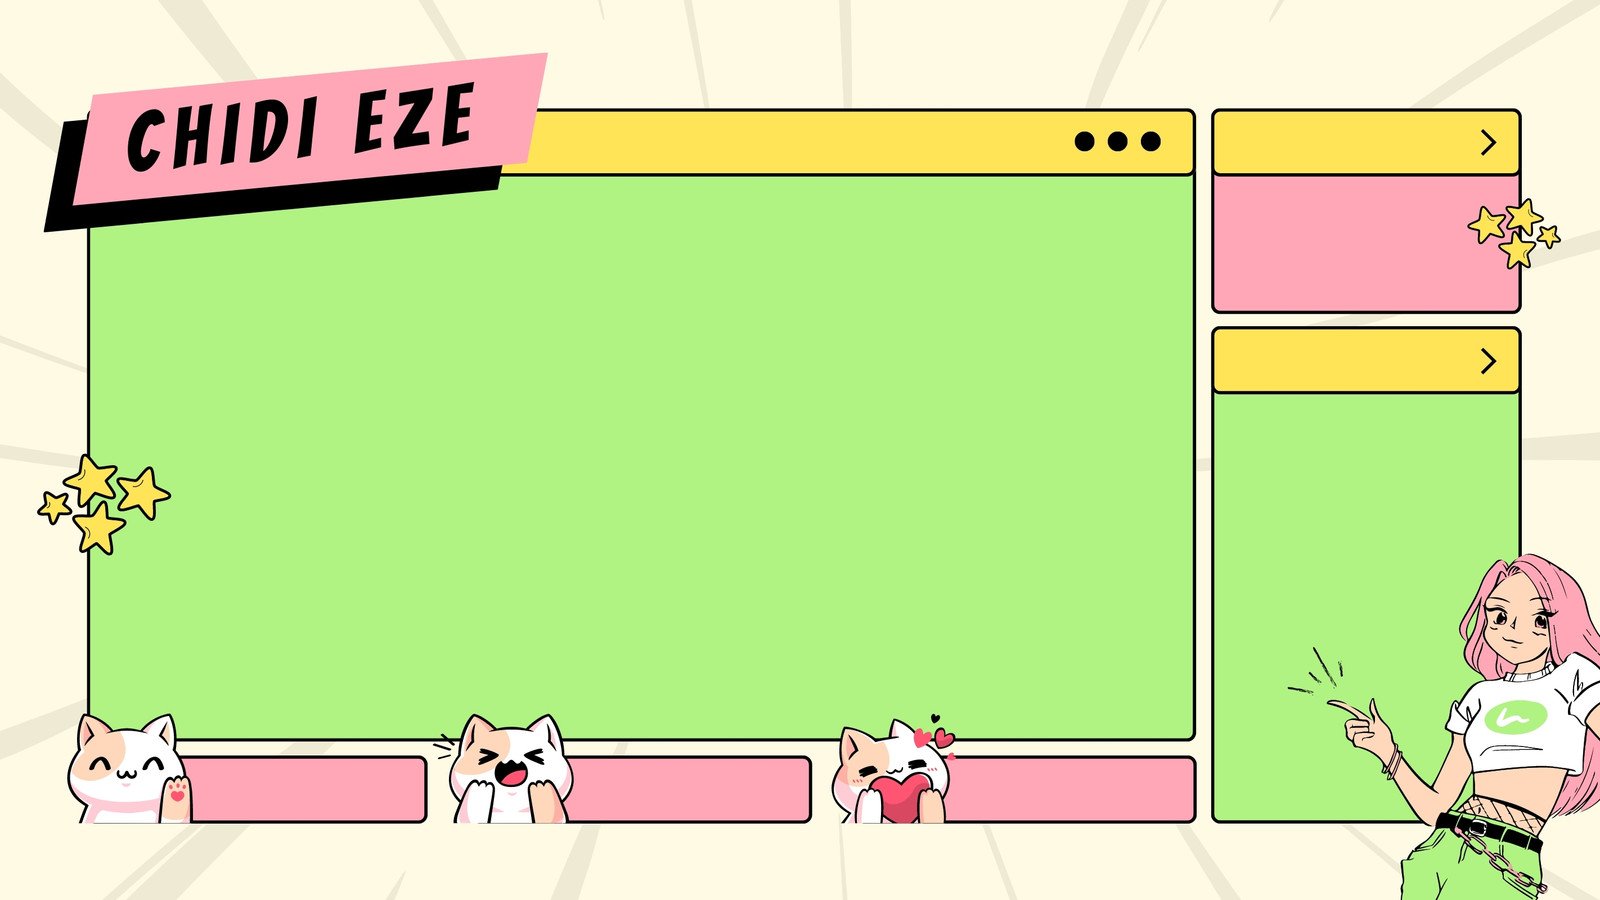 Cute Friends Twitch Overlay Stream Package 2021 on Behance